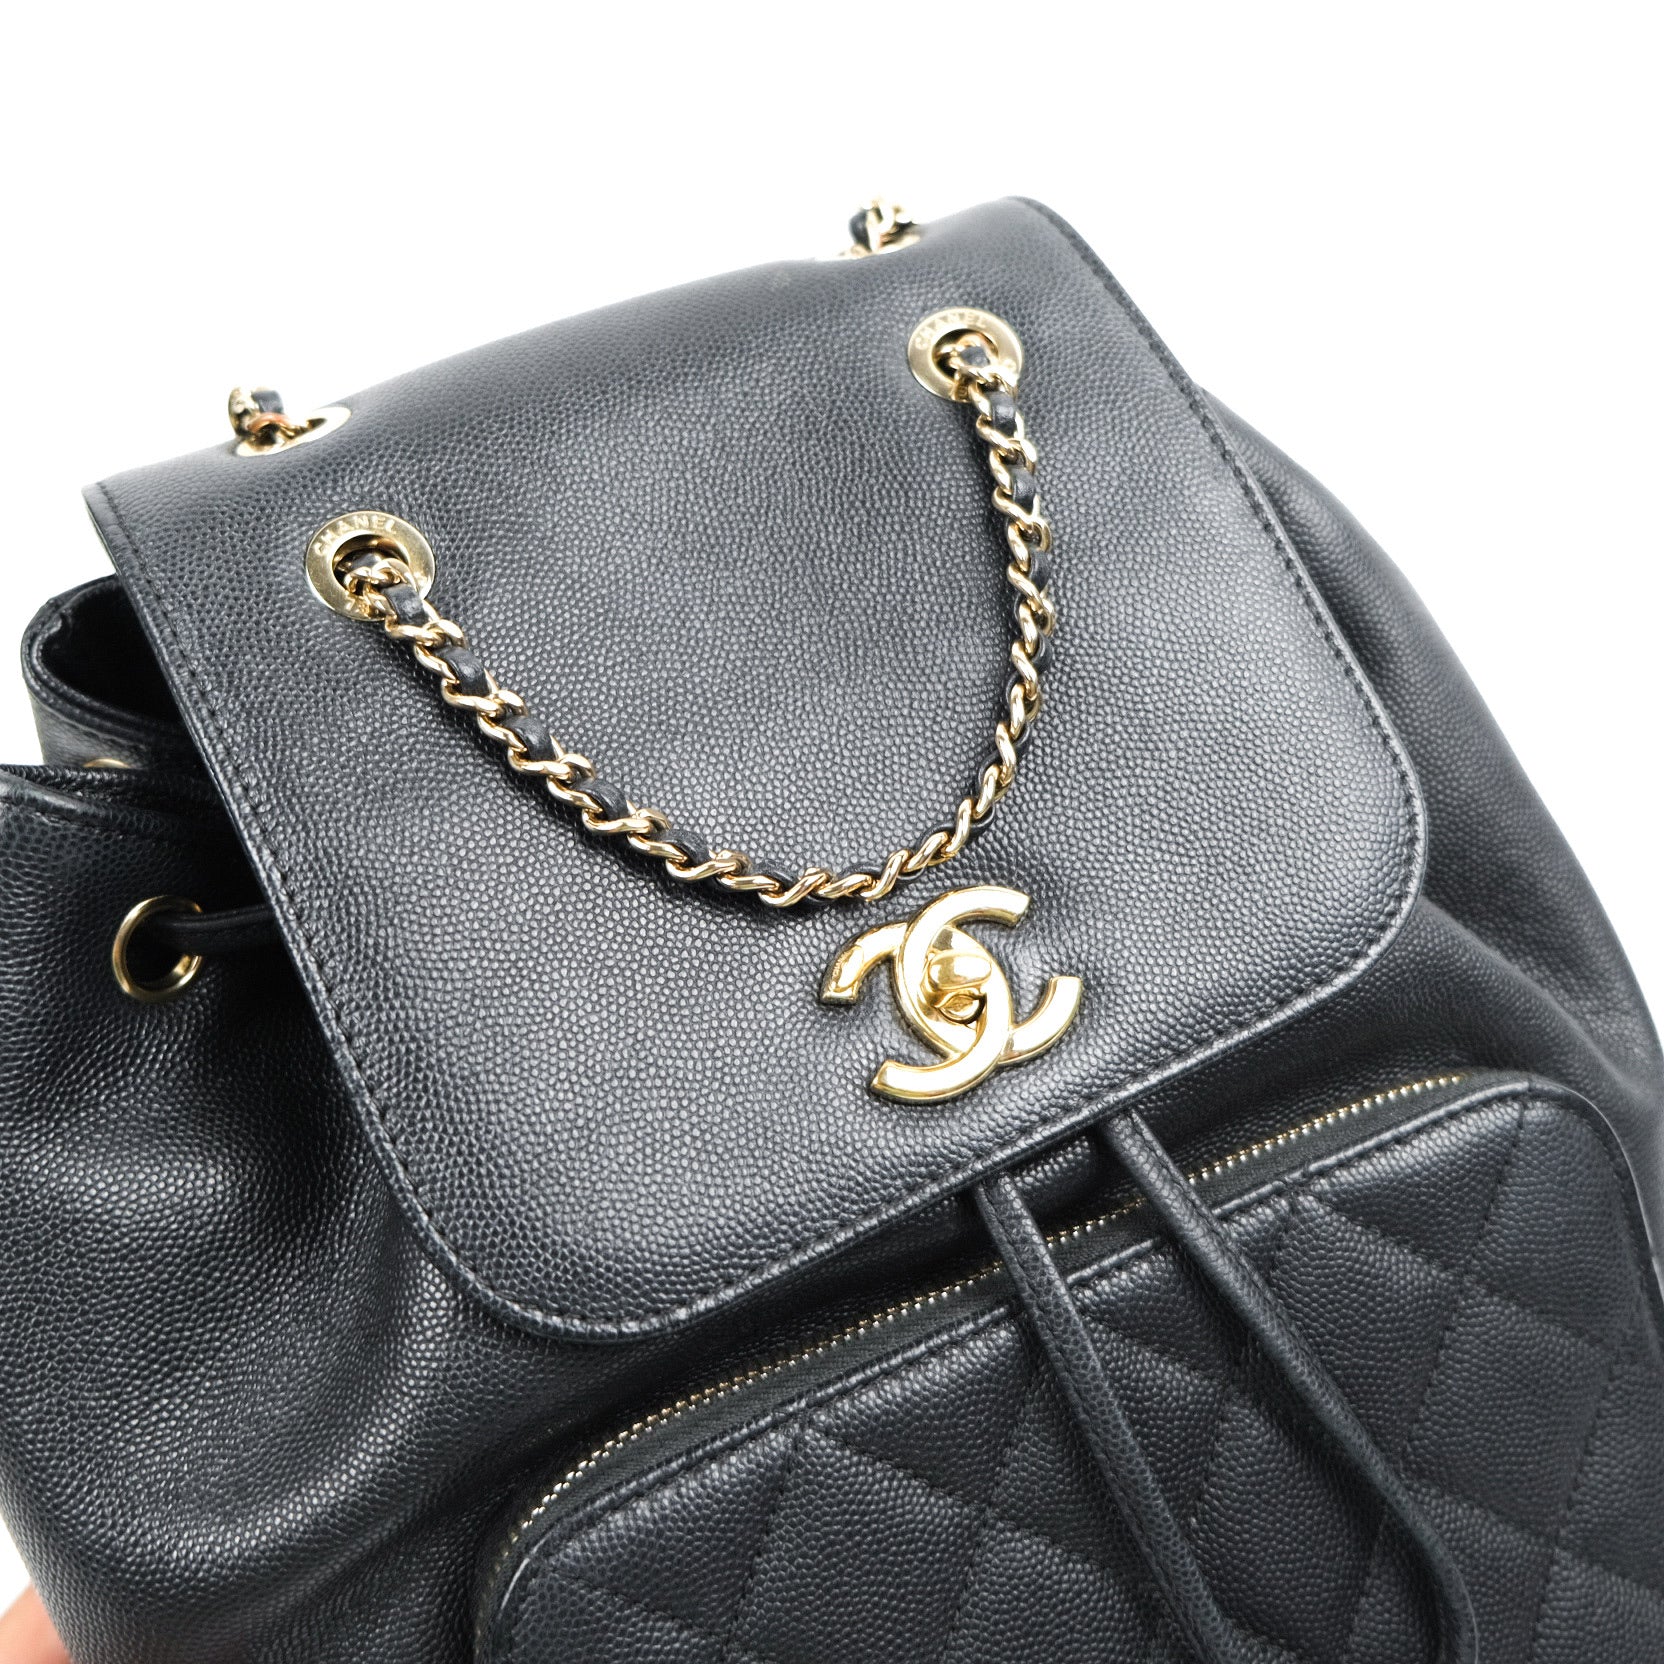 Authentic Chanel Black Caviar Leather Business Affinity Backpack